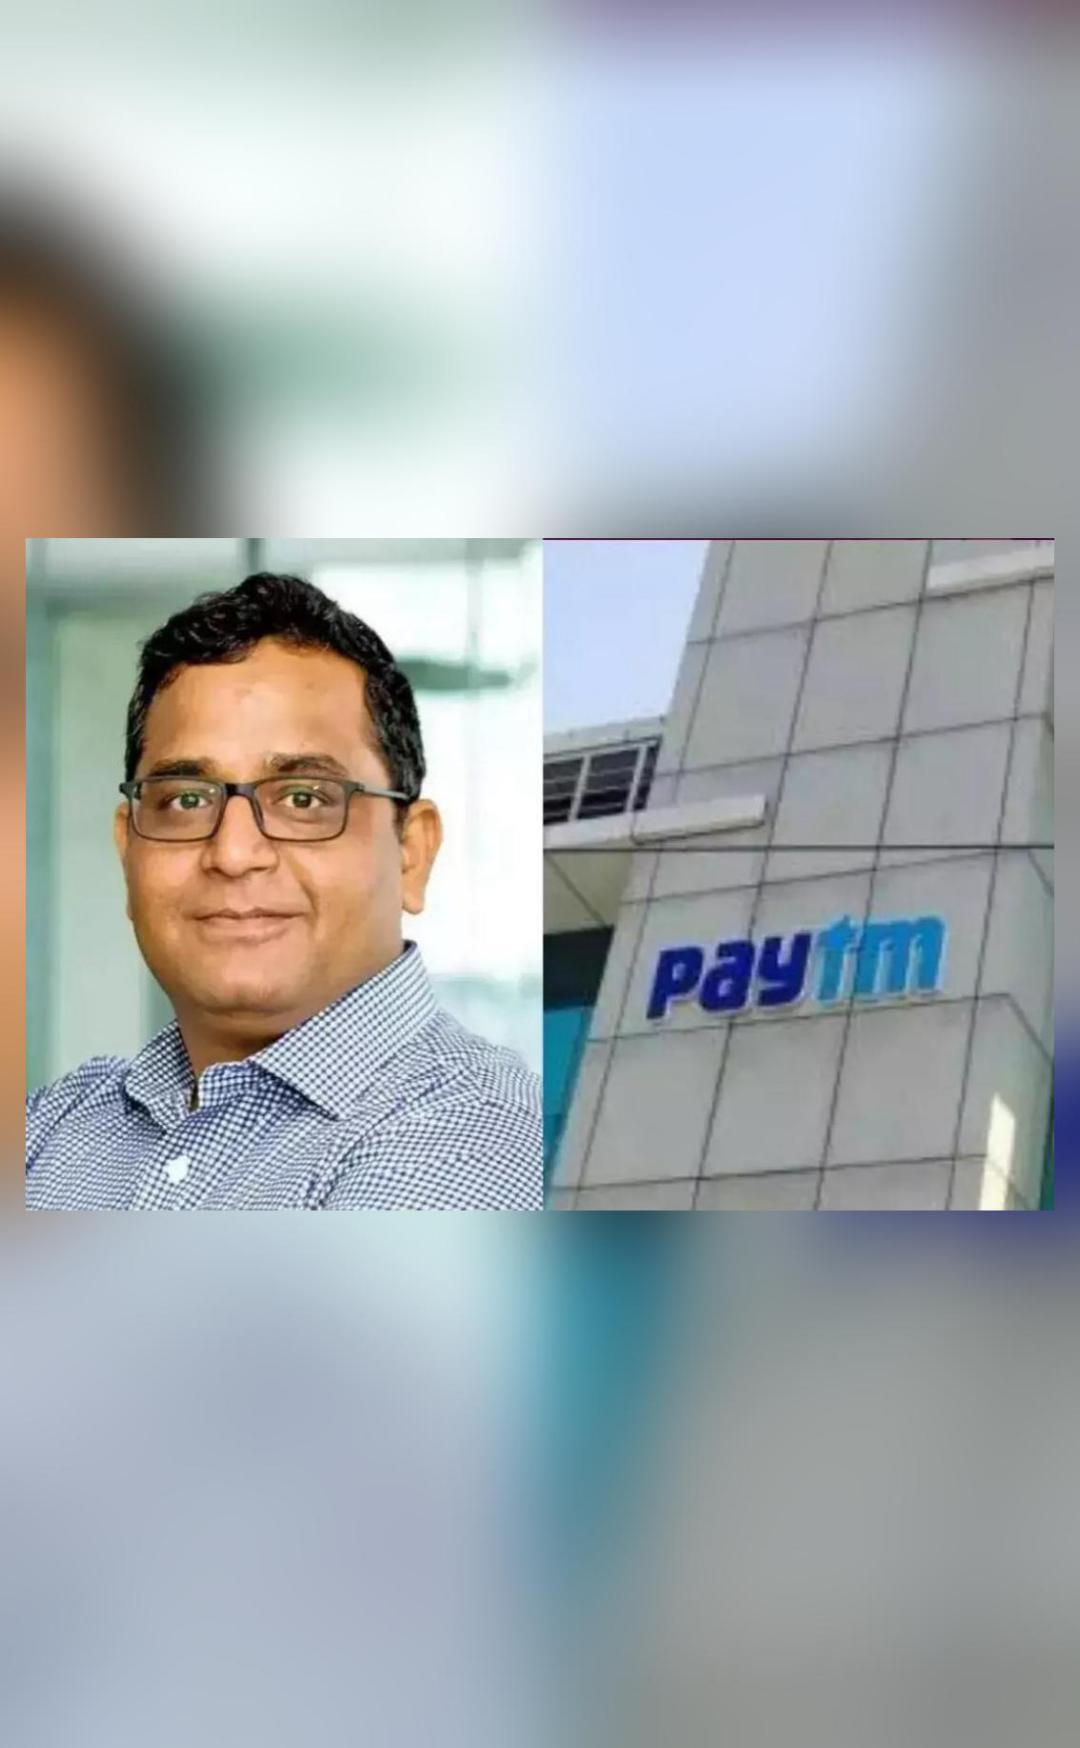 Next goal is to be free cash flow positive: Paytm CEO Sharma